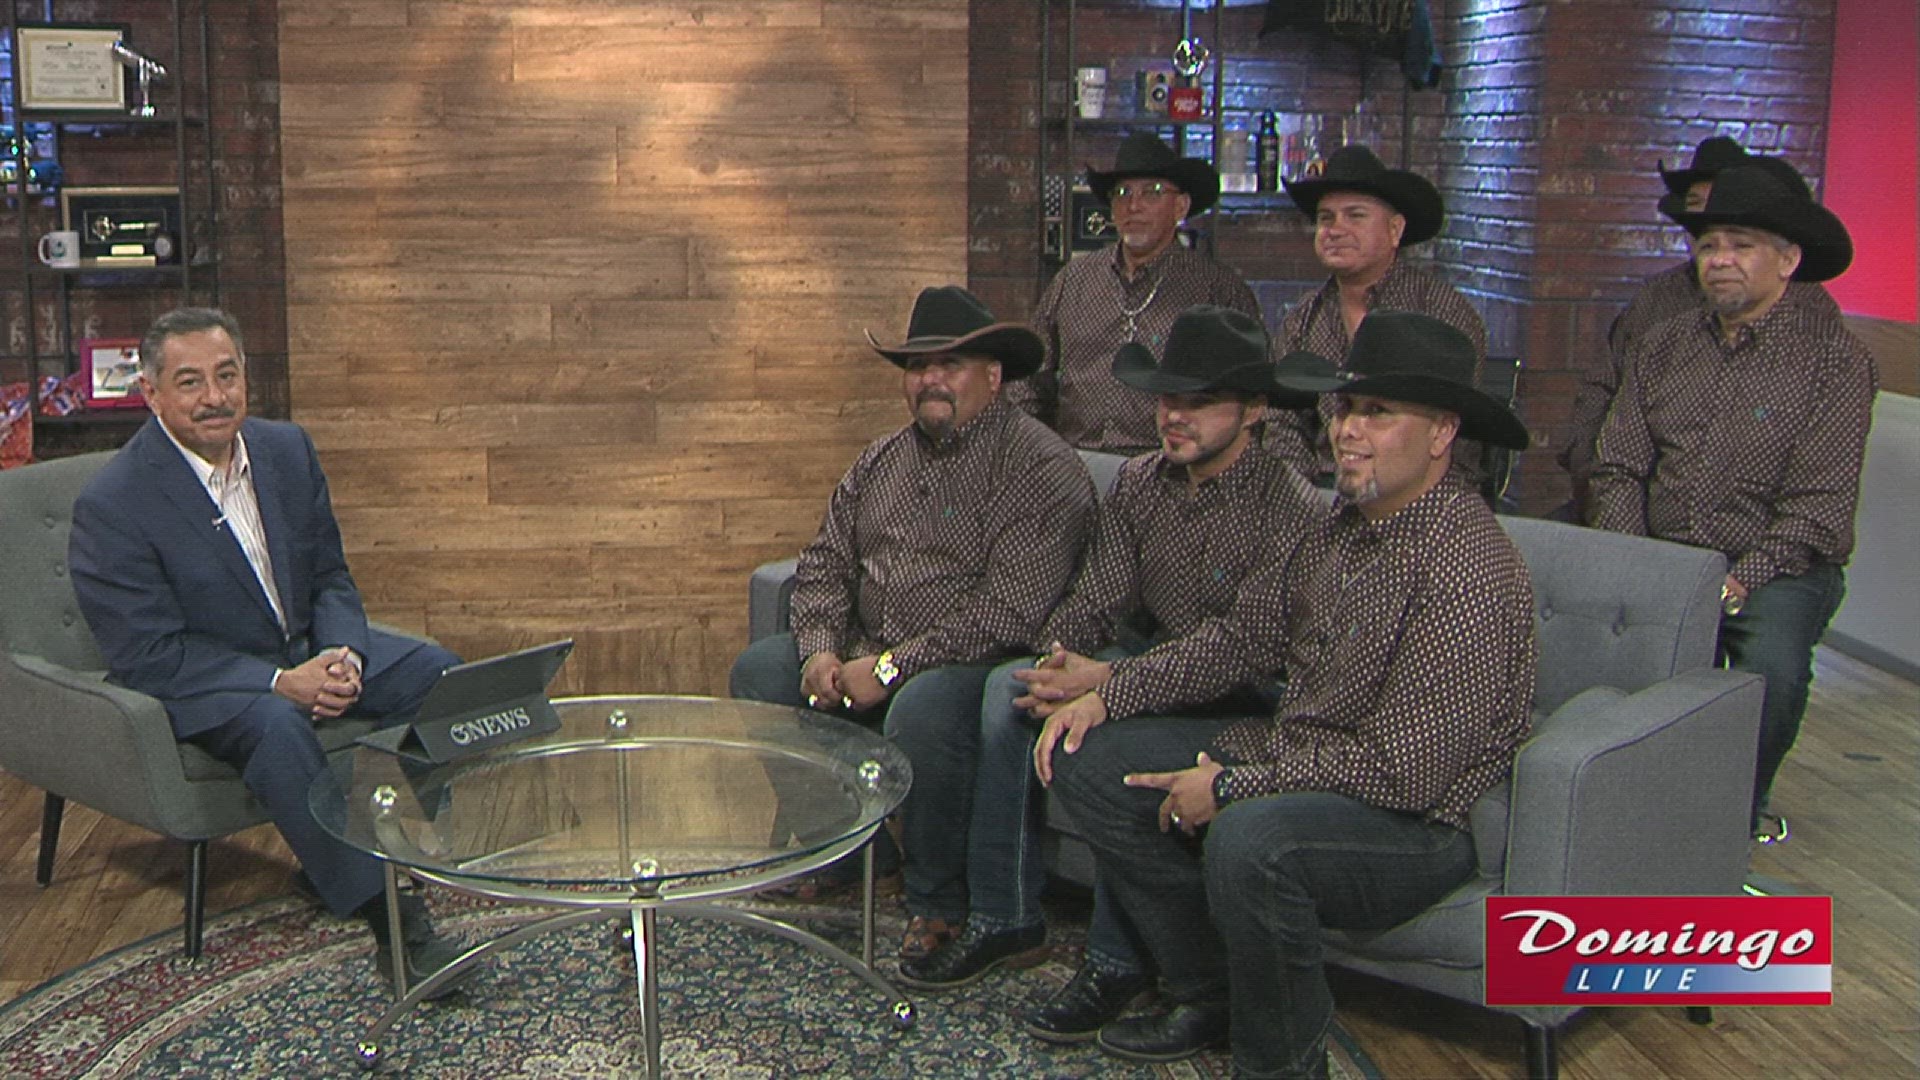 Robstown-based Tejano group Los Arias joined us on Domingo Live to talk about their new music, new gigs and reppin' Robstown.